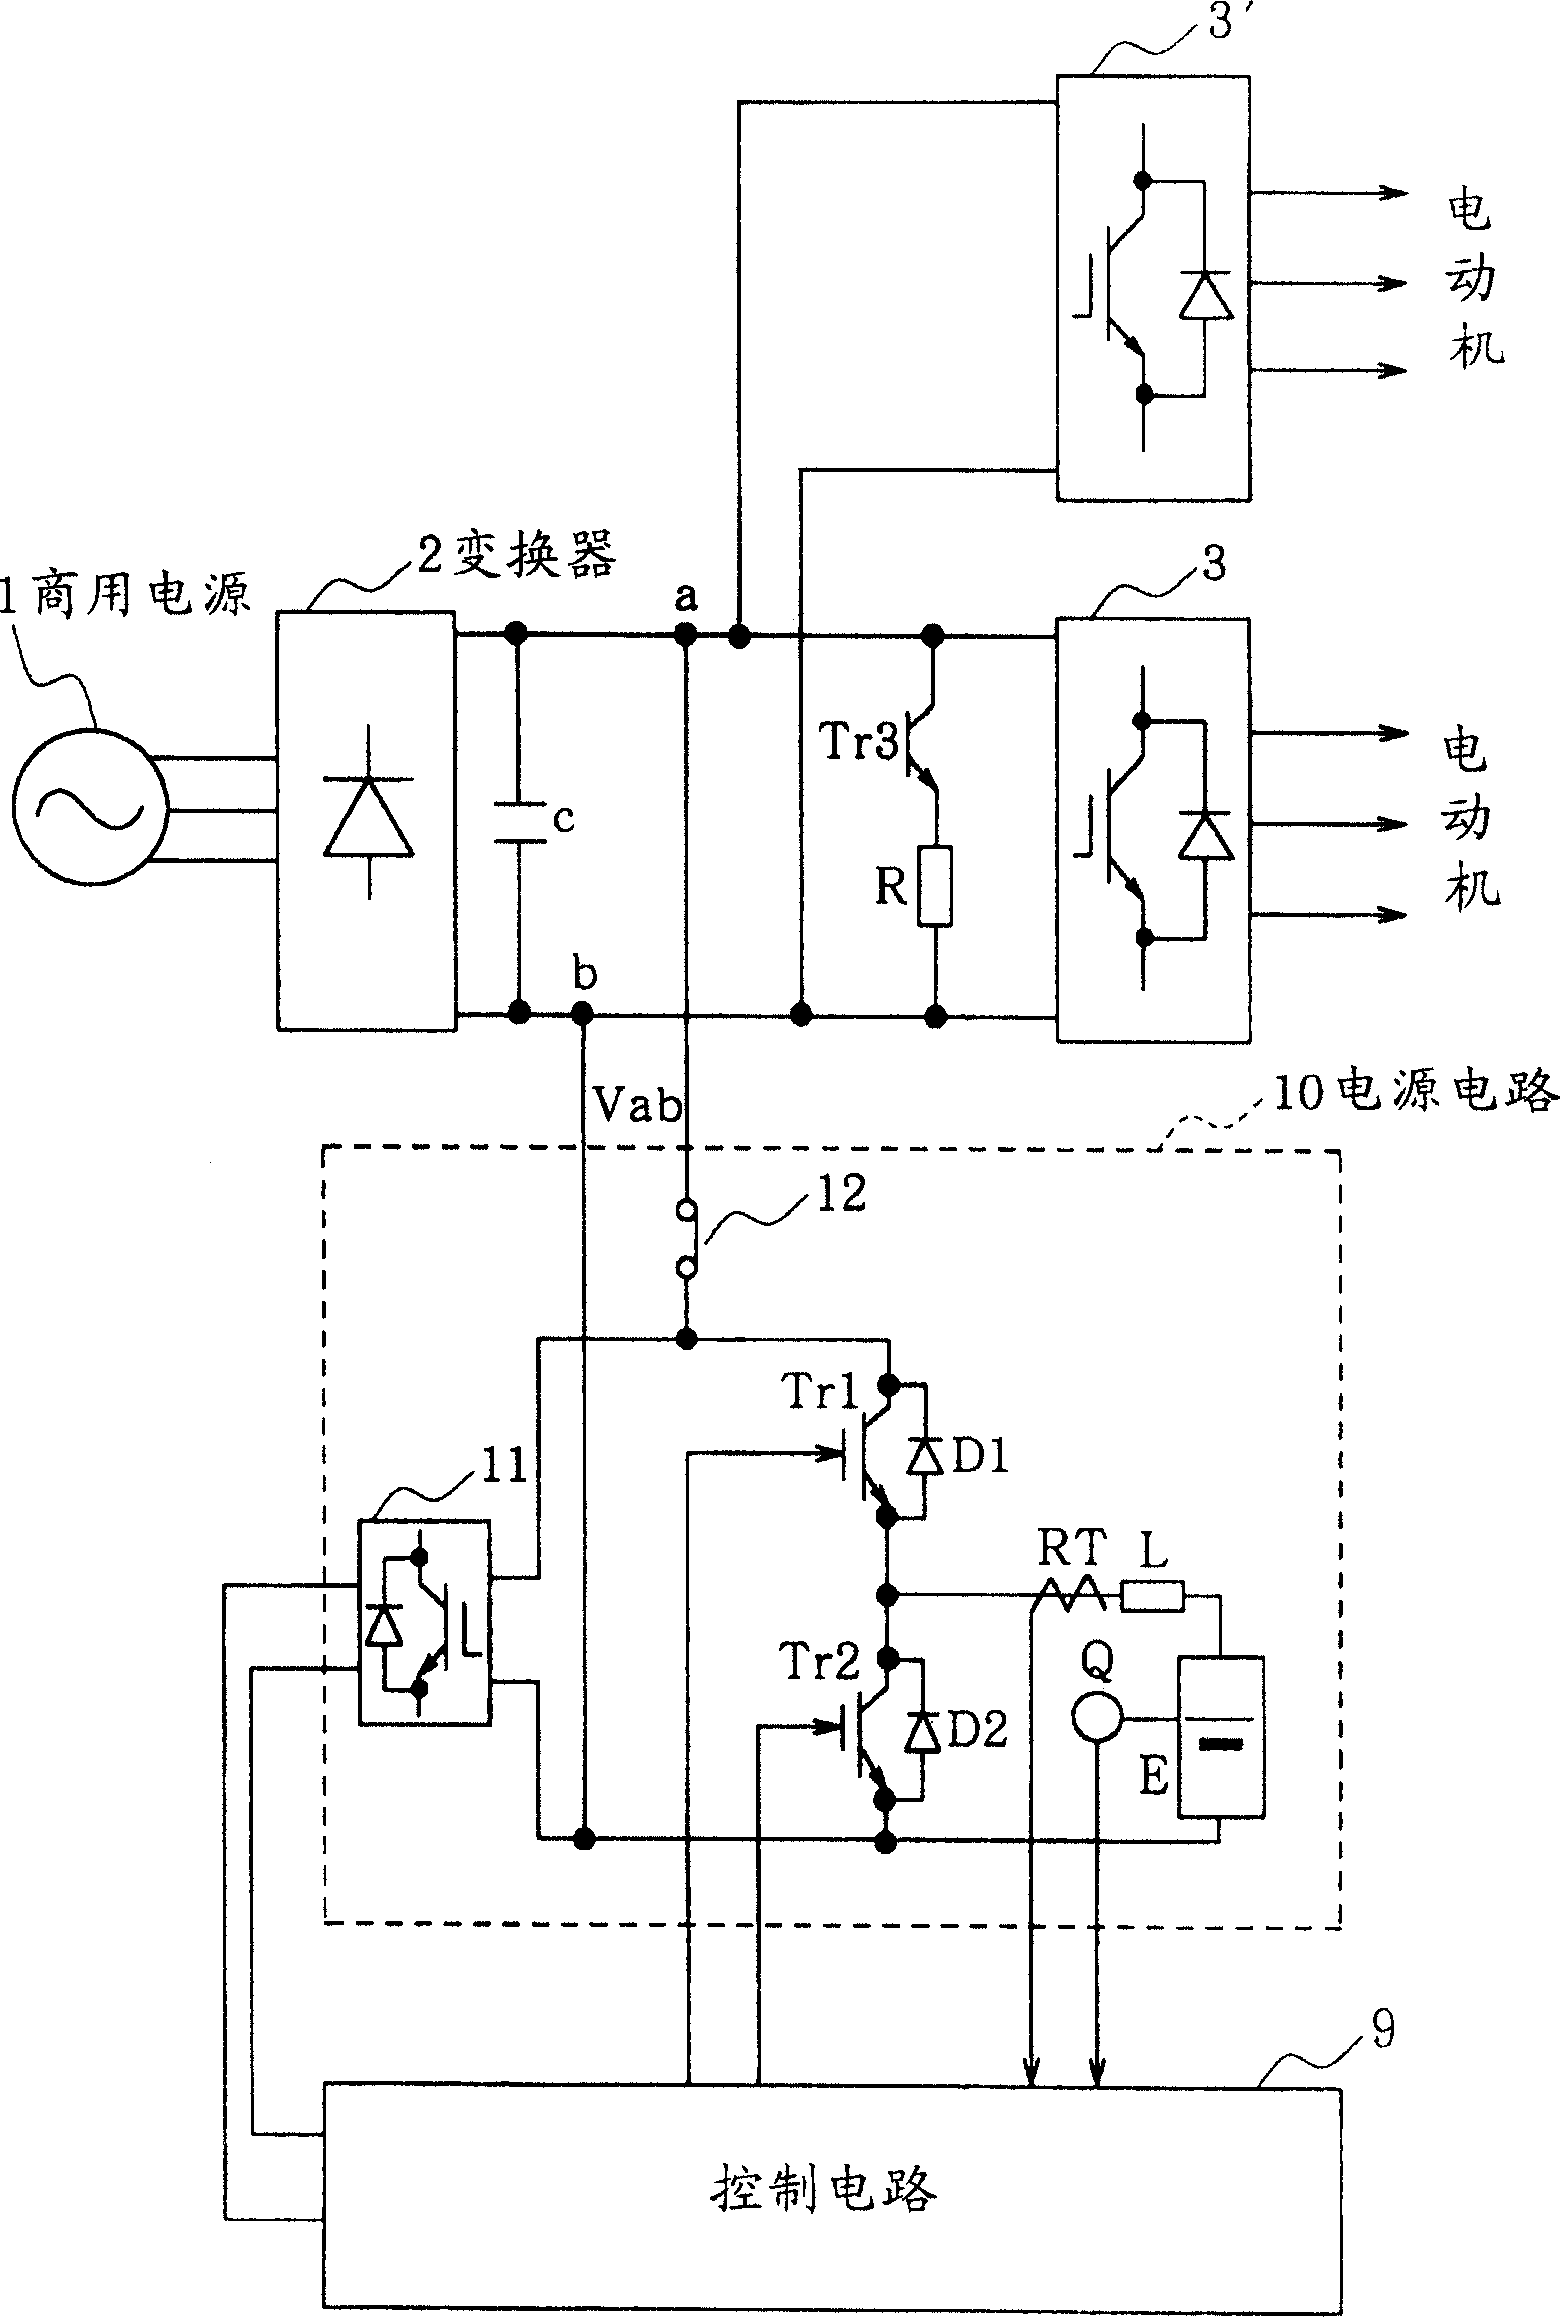 Power supply for AC elevator